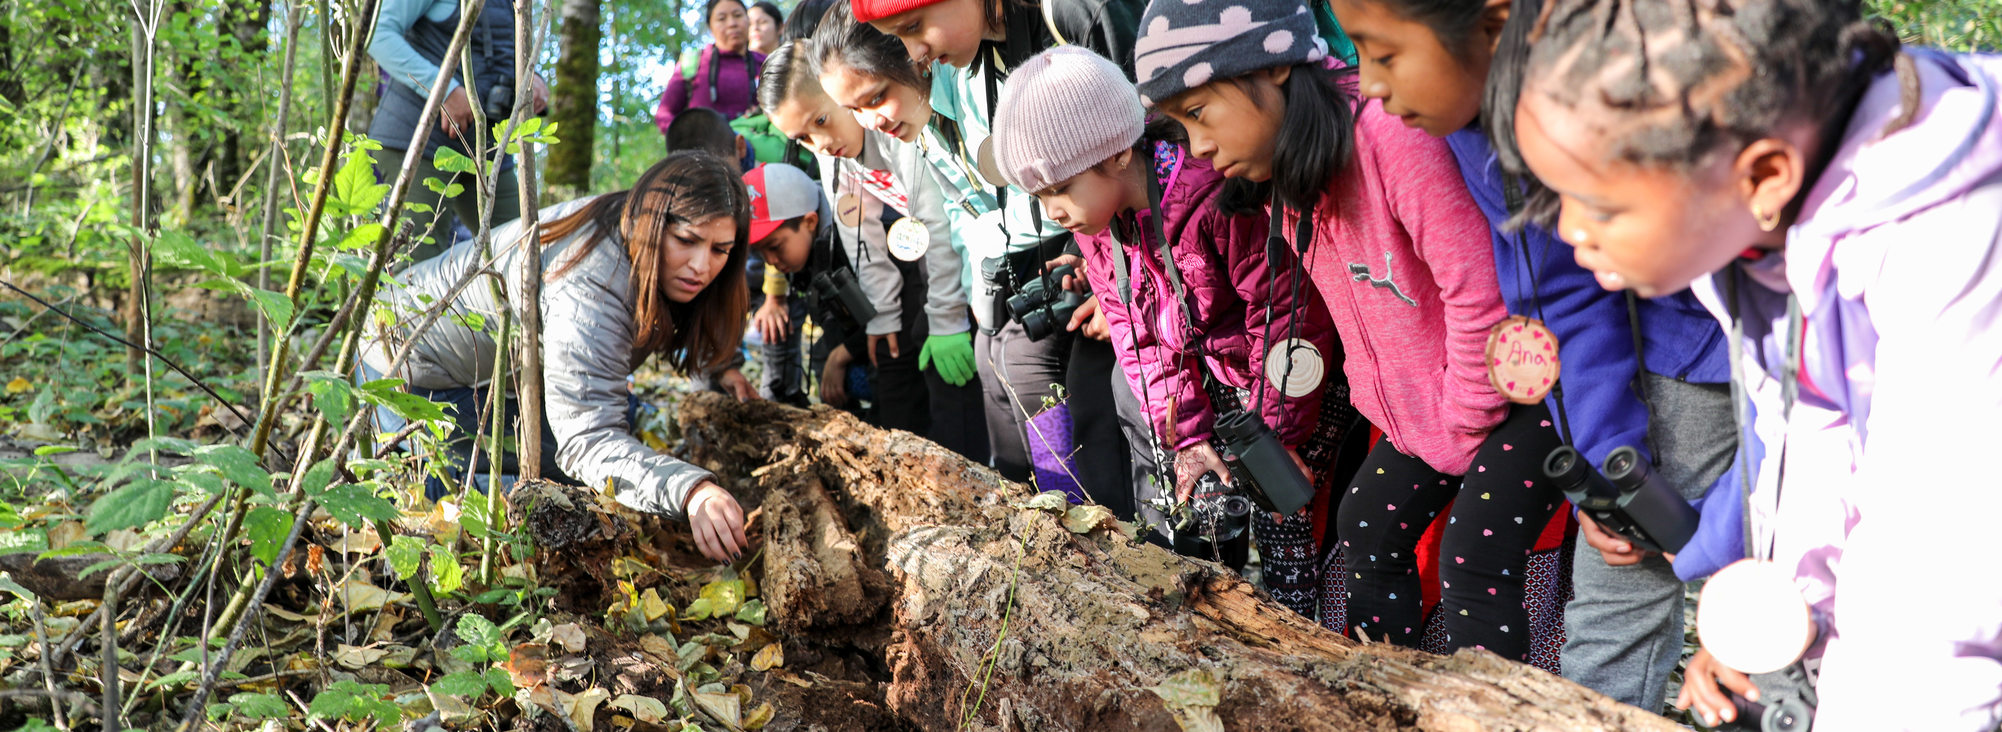 A group of black and brown children from Club Aves look under a nurse log with a Metro nature educator.